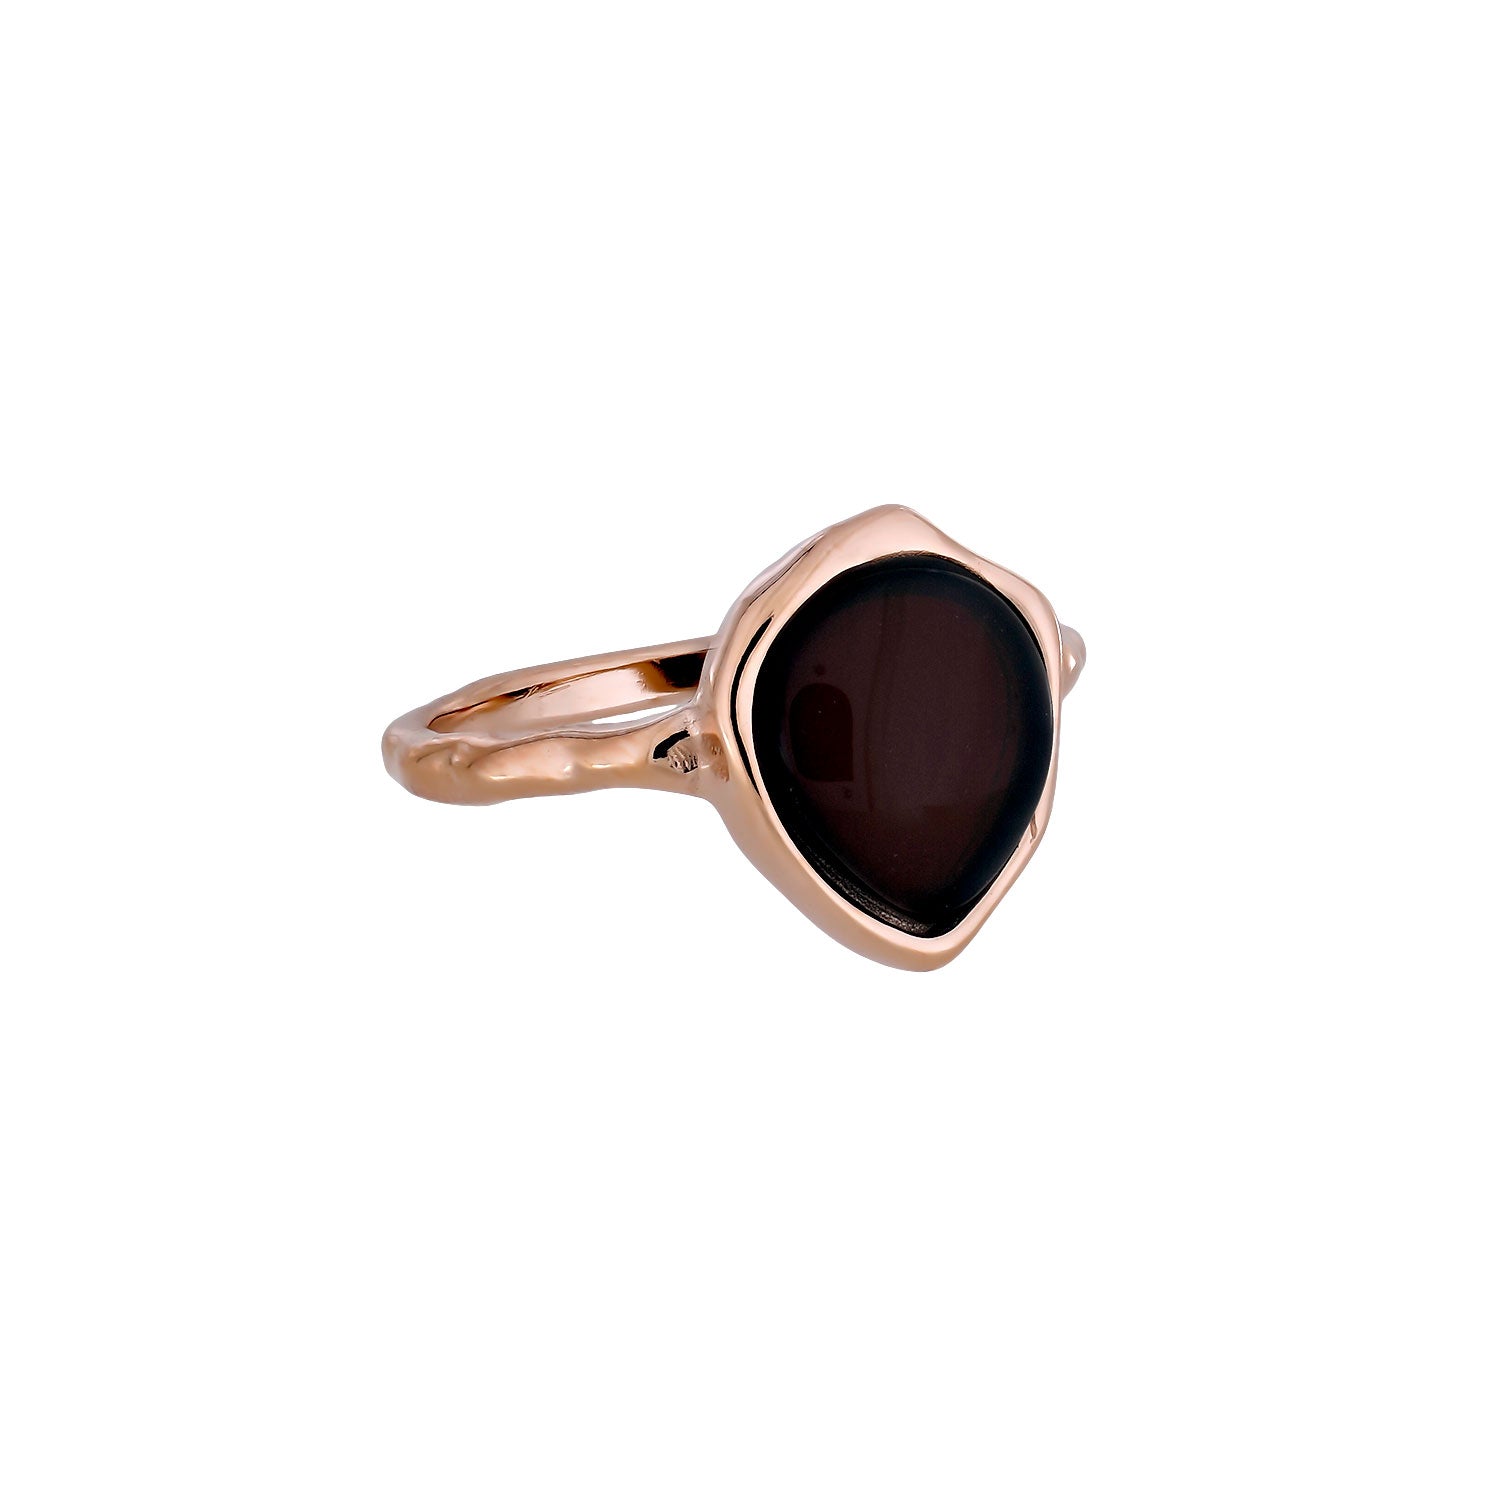 Northern Lights Baltic Amber Ring in Rose Gold Vermeil